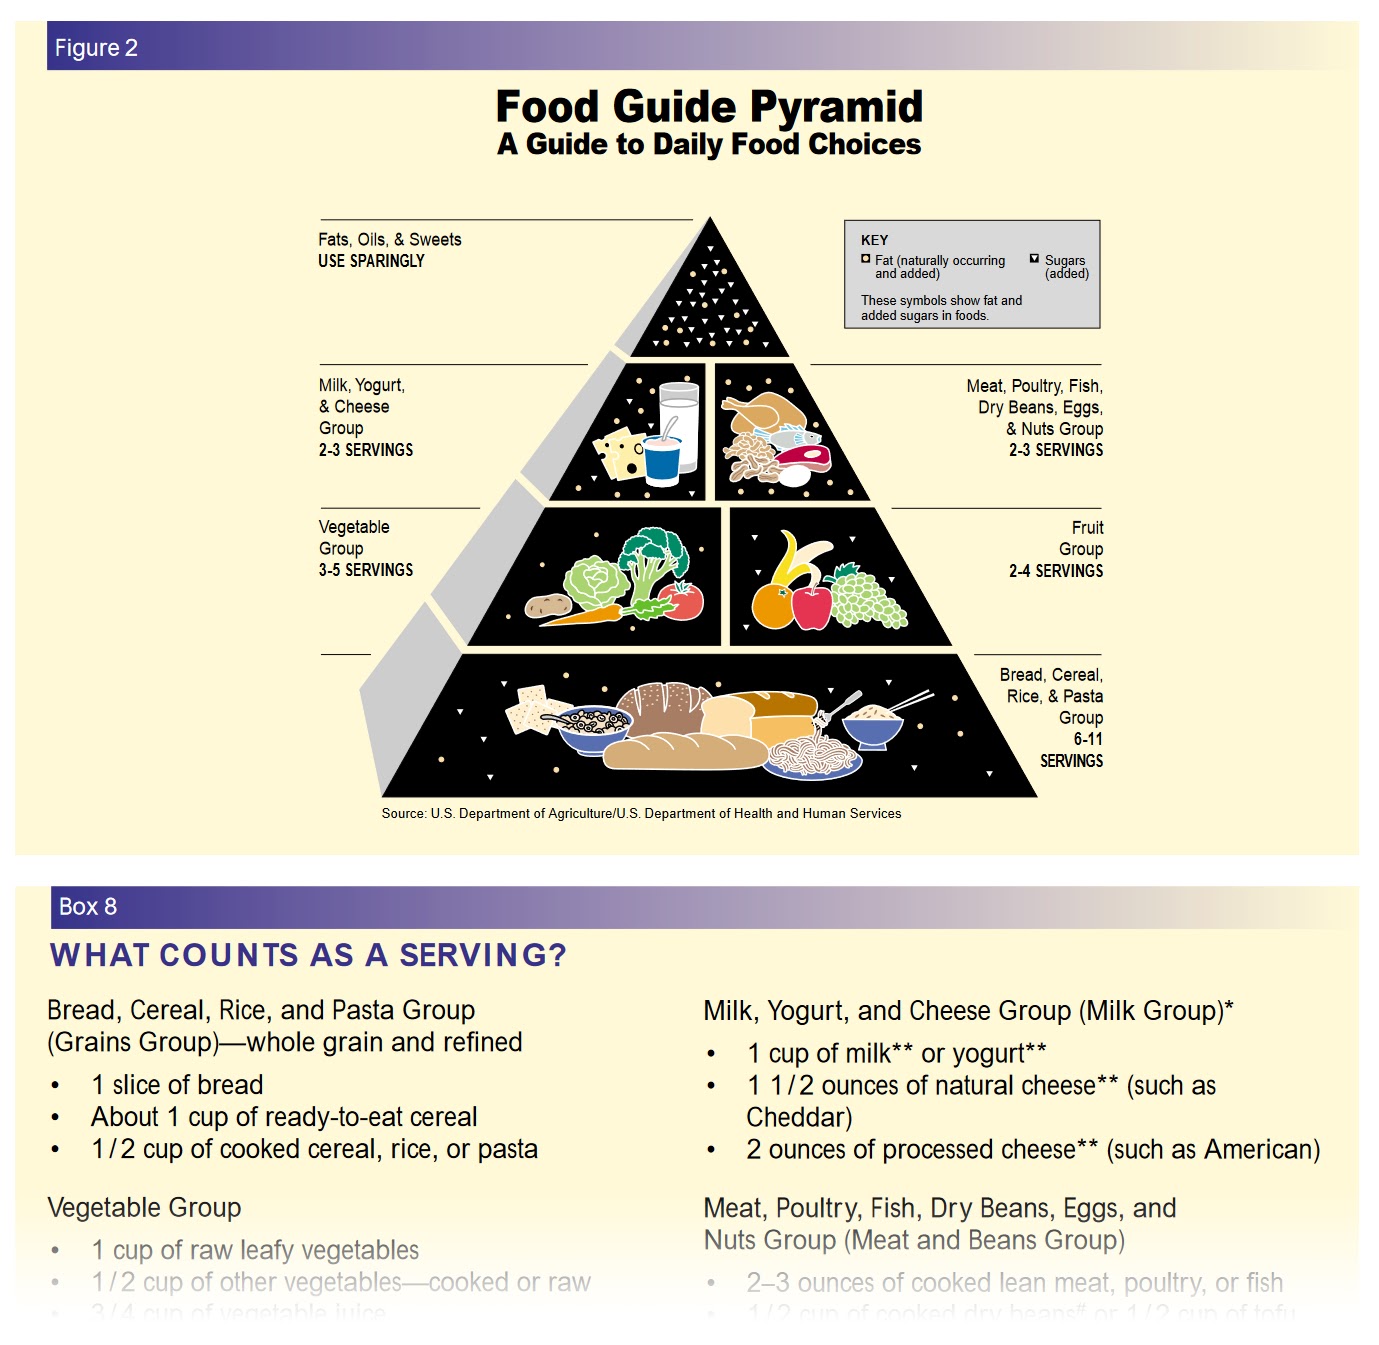 U.S. Department of Agriculture’s food pyramid